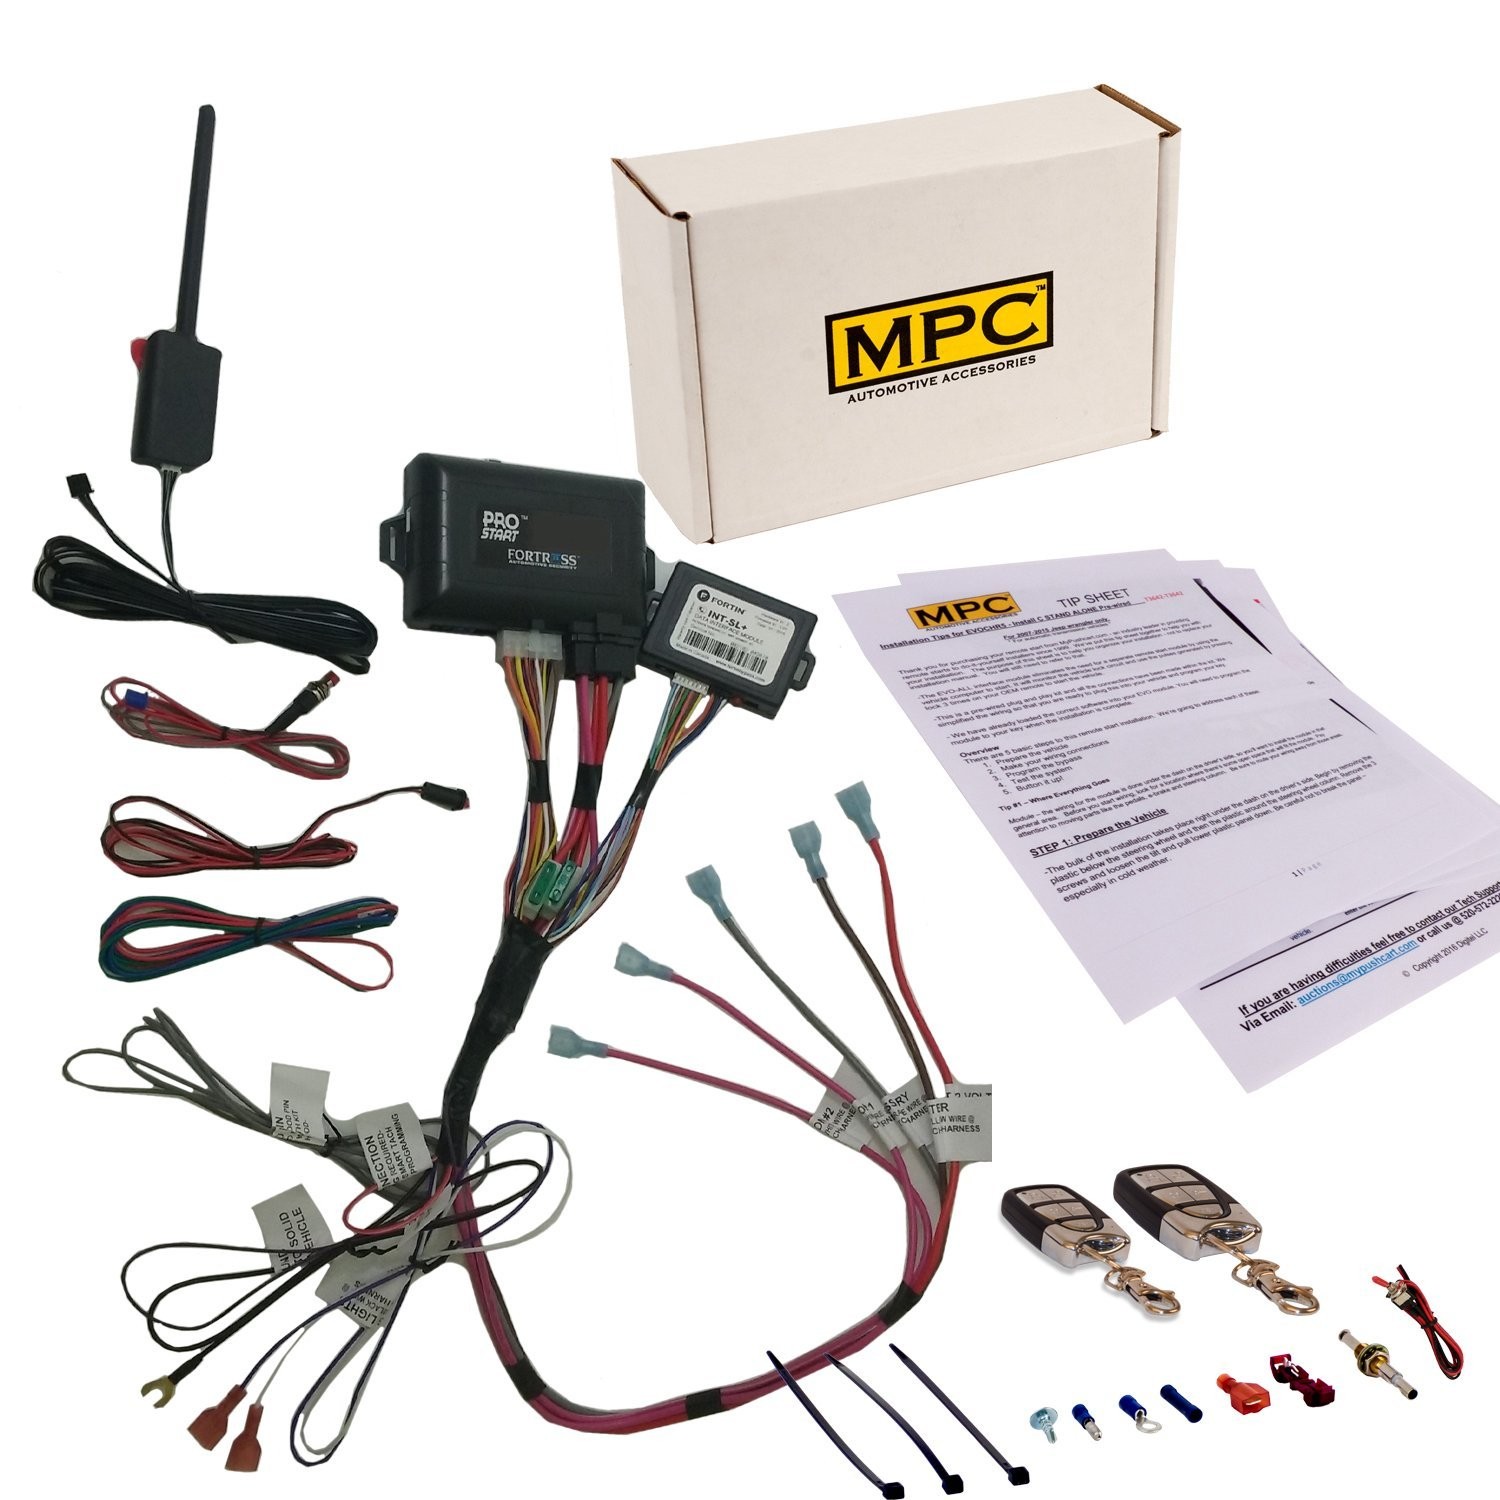 Amazon MPC Remote Start & Keyless Entry Kit Fits Select Chevrolet and GMC Vehicles 2002 2009 Prewired To Simplify Install Automotive